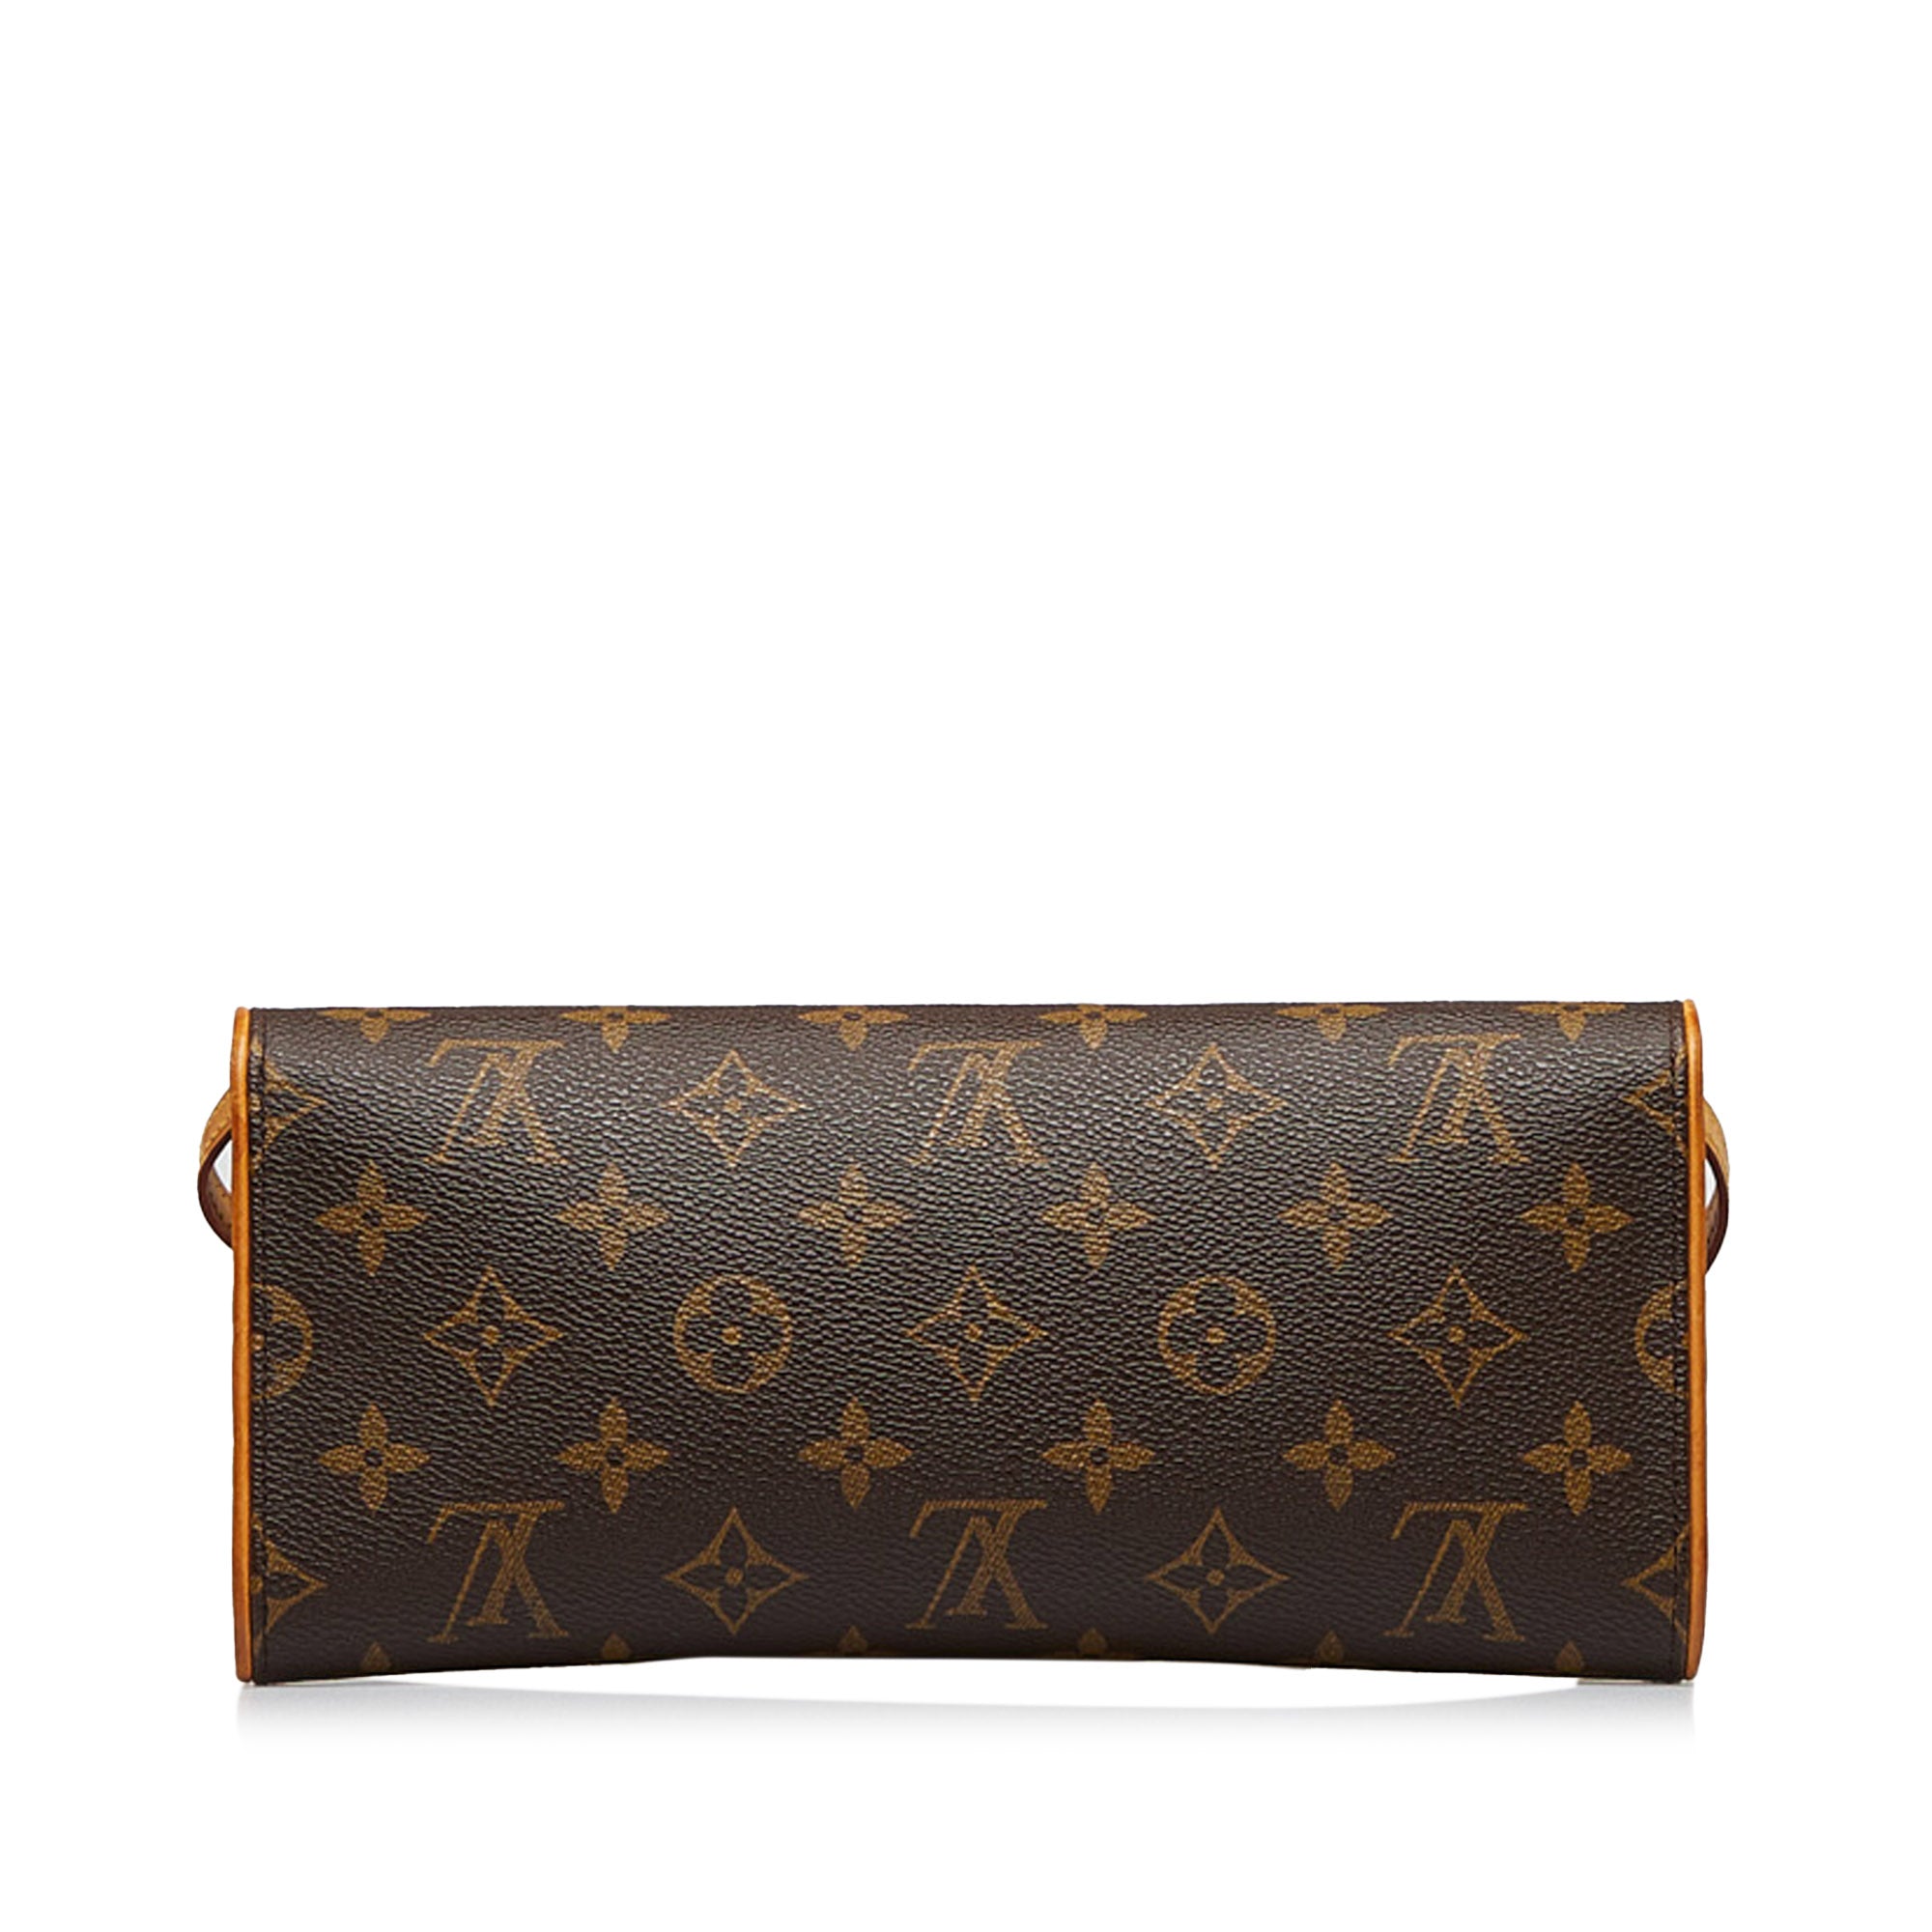 Louis Vuitton - Authenticated Clutch Bag - Cloth Brown for Women, Very Good Condition